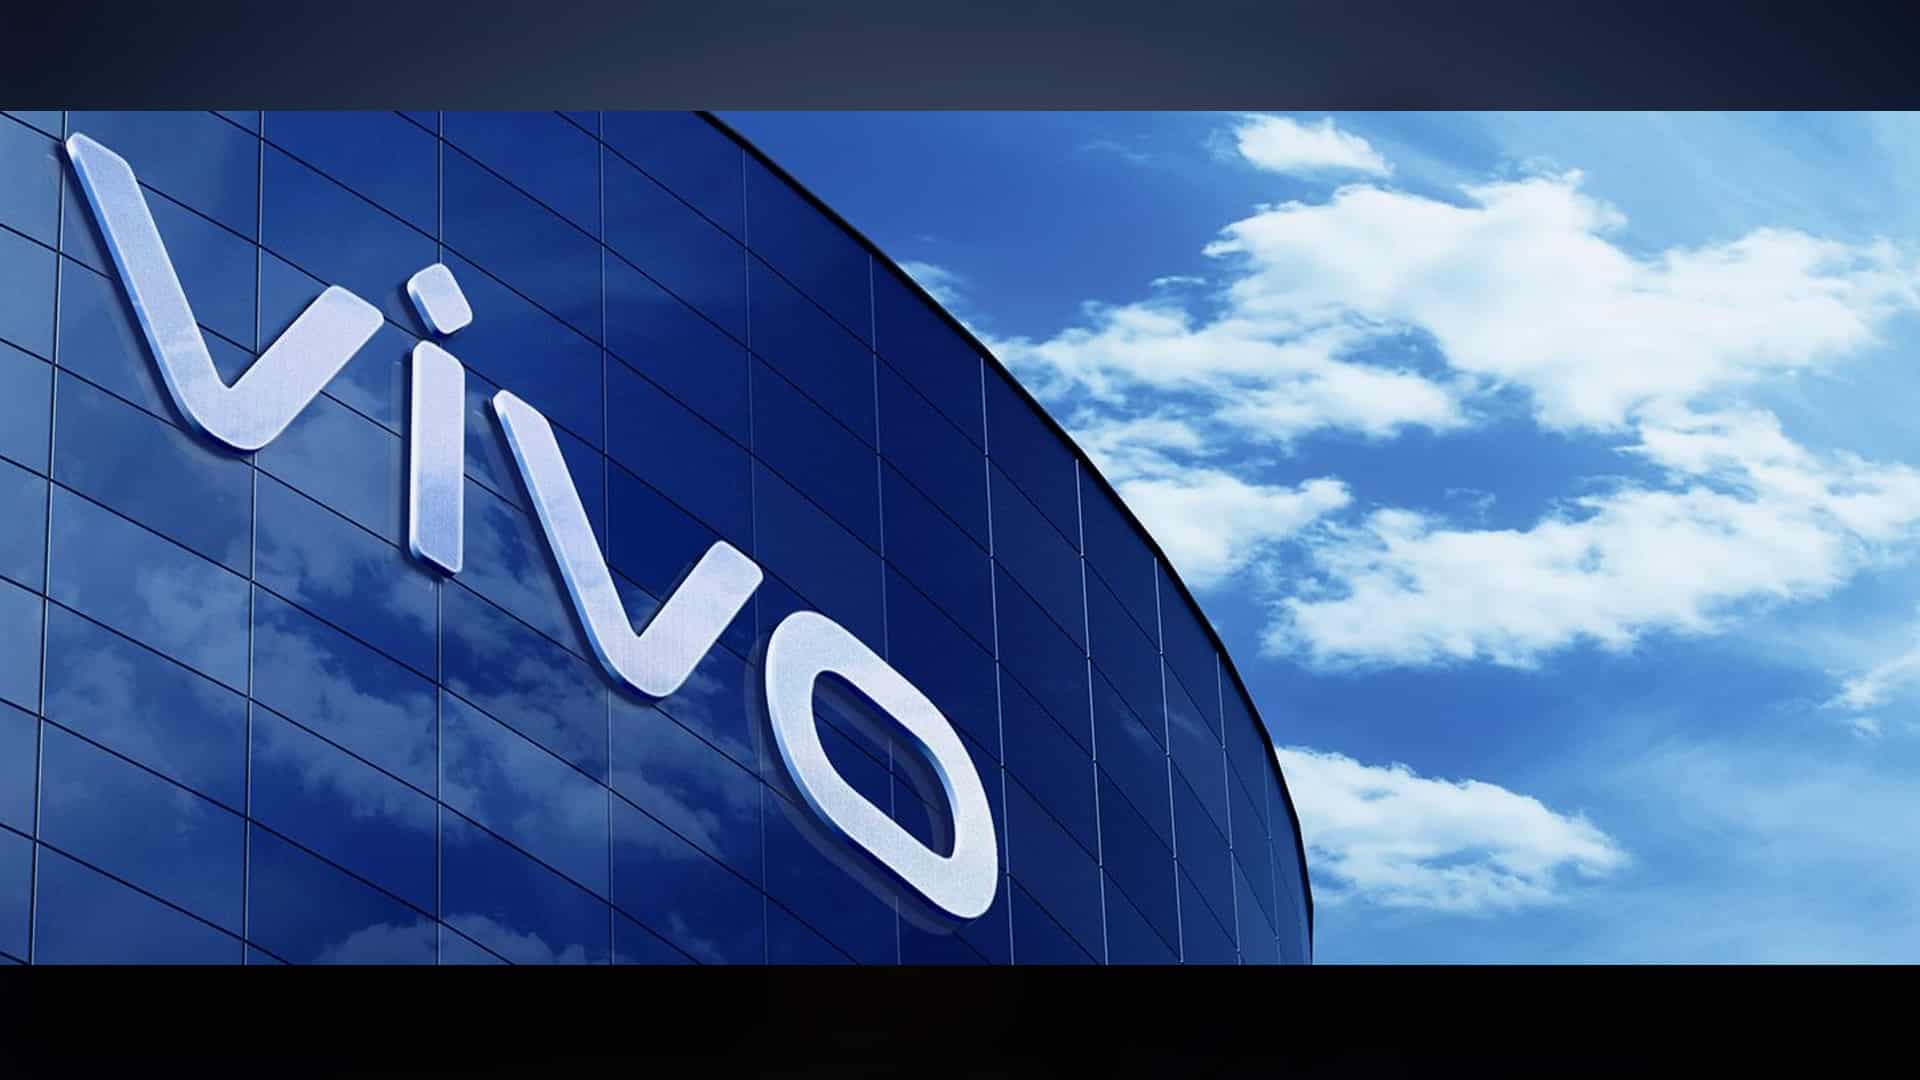 ED conducts raids against Vivo, related companies in money laundering probe